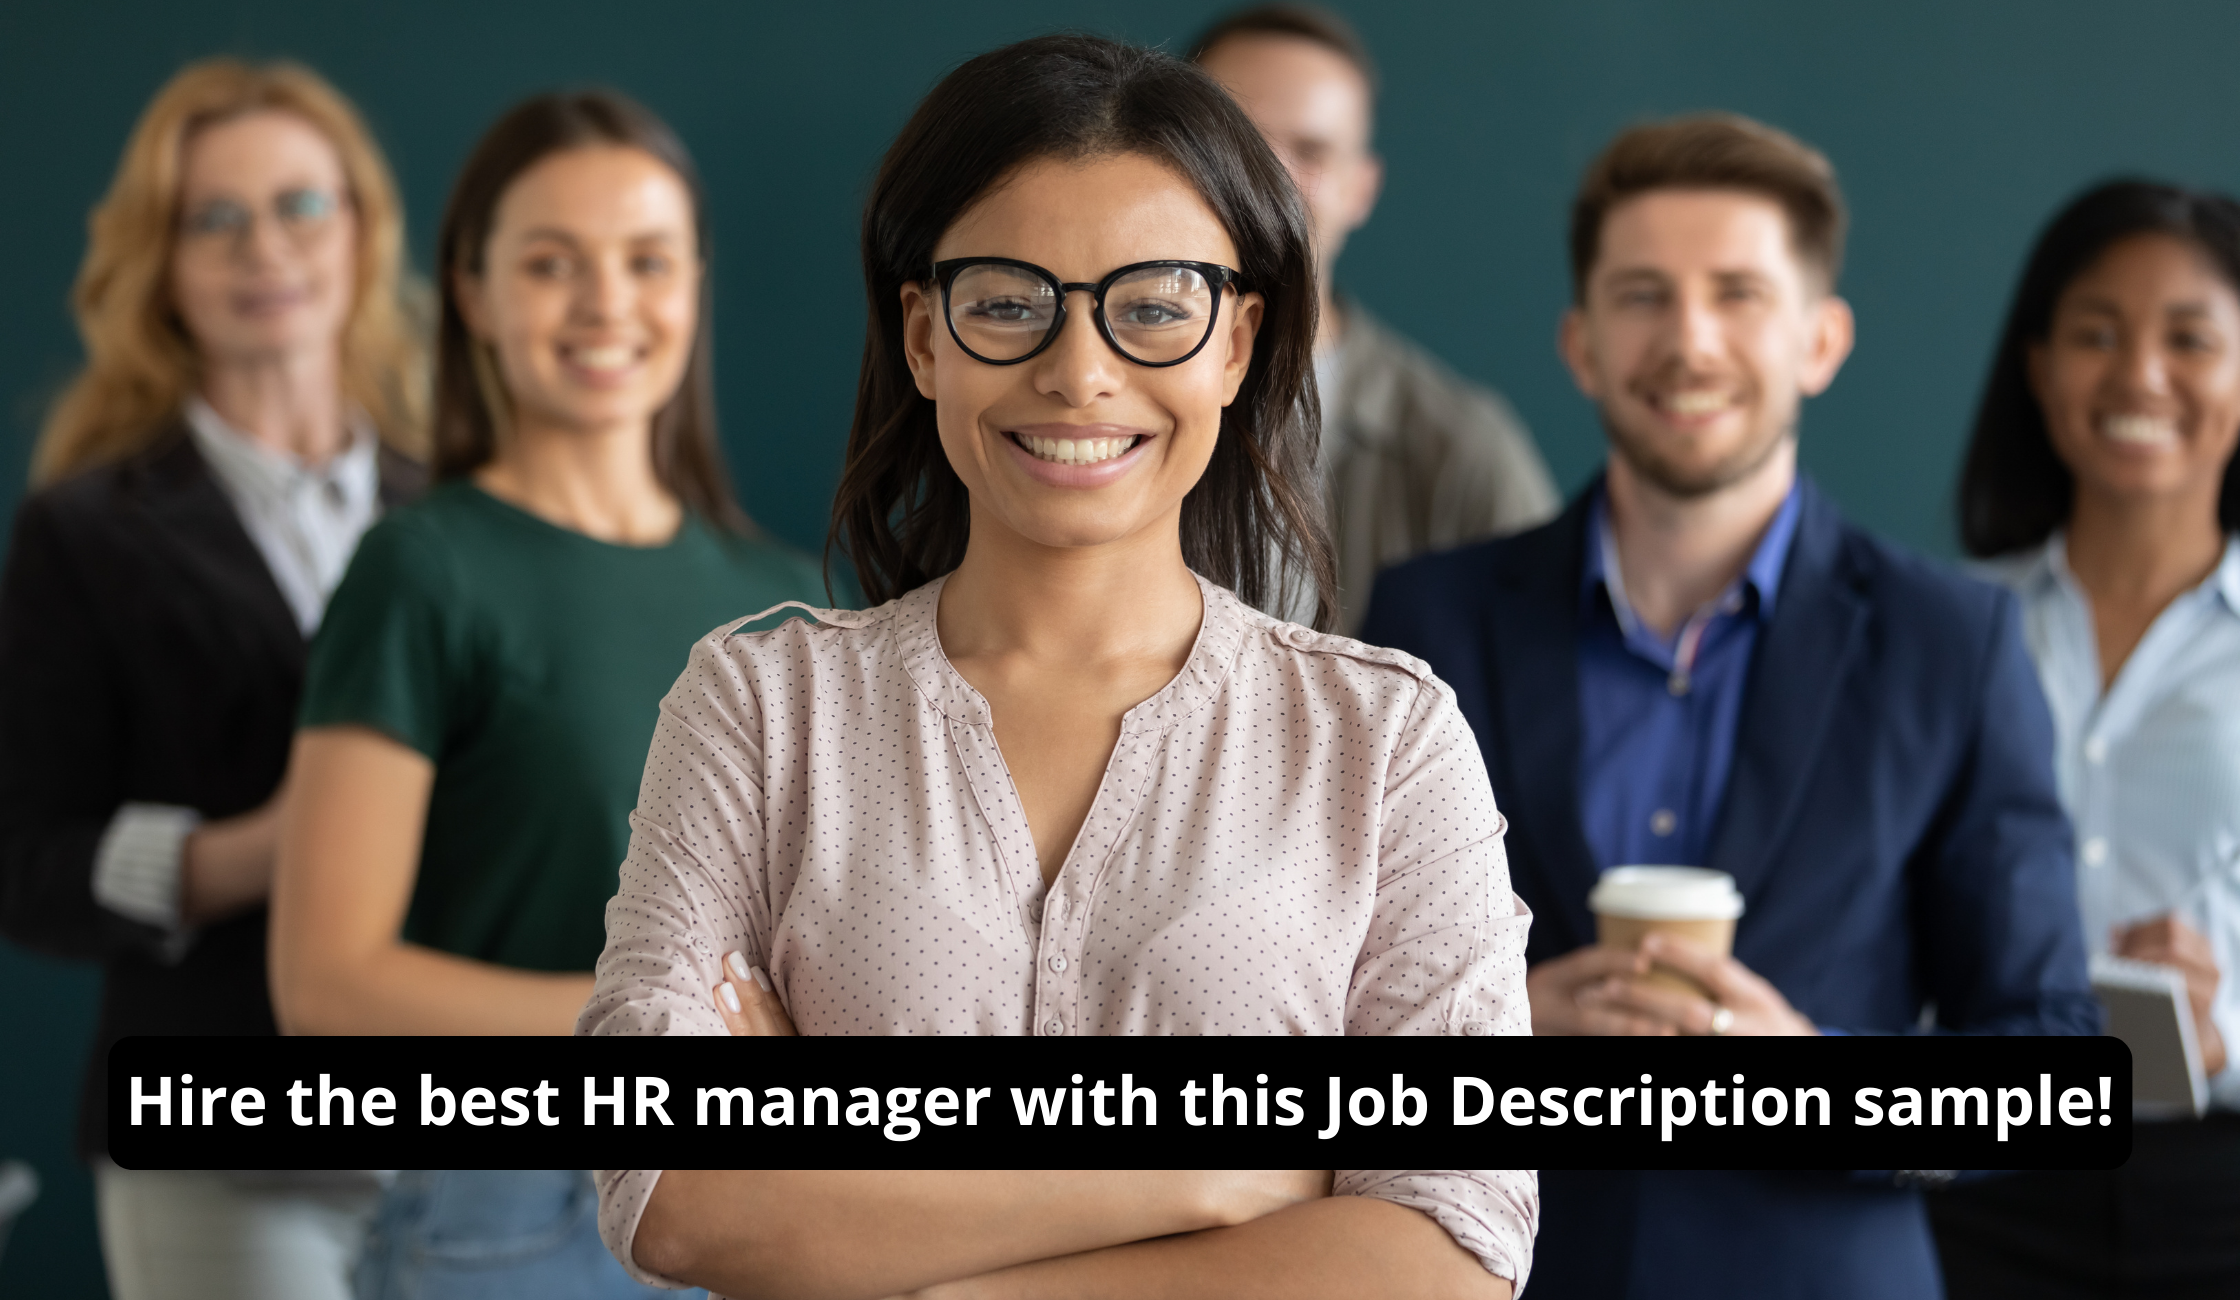 You are currently viewing HR Manager Job Description: Attract the best HR manager in just 4 steps!